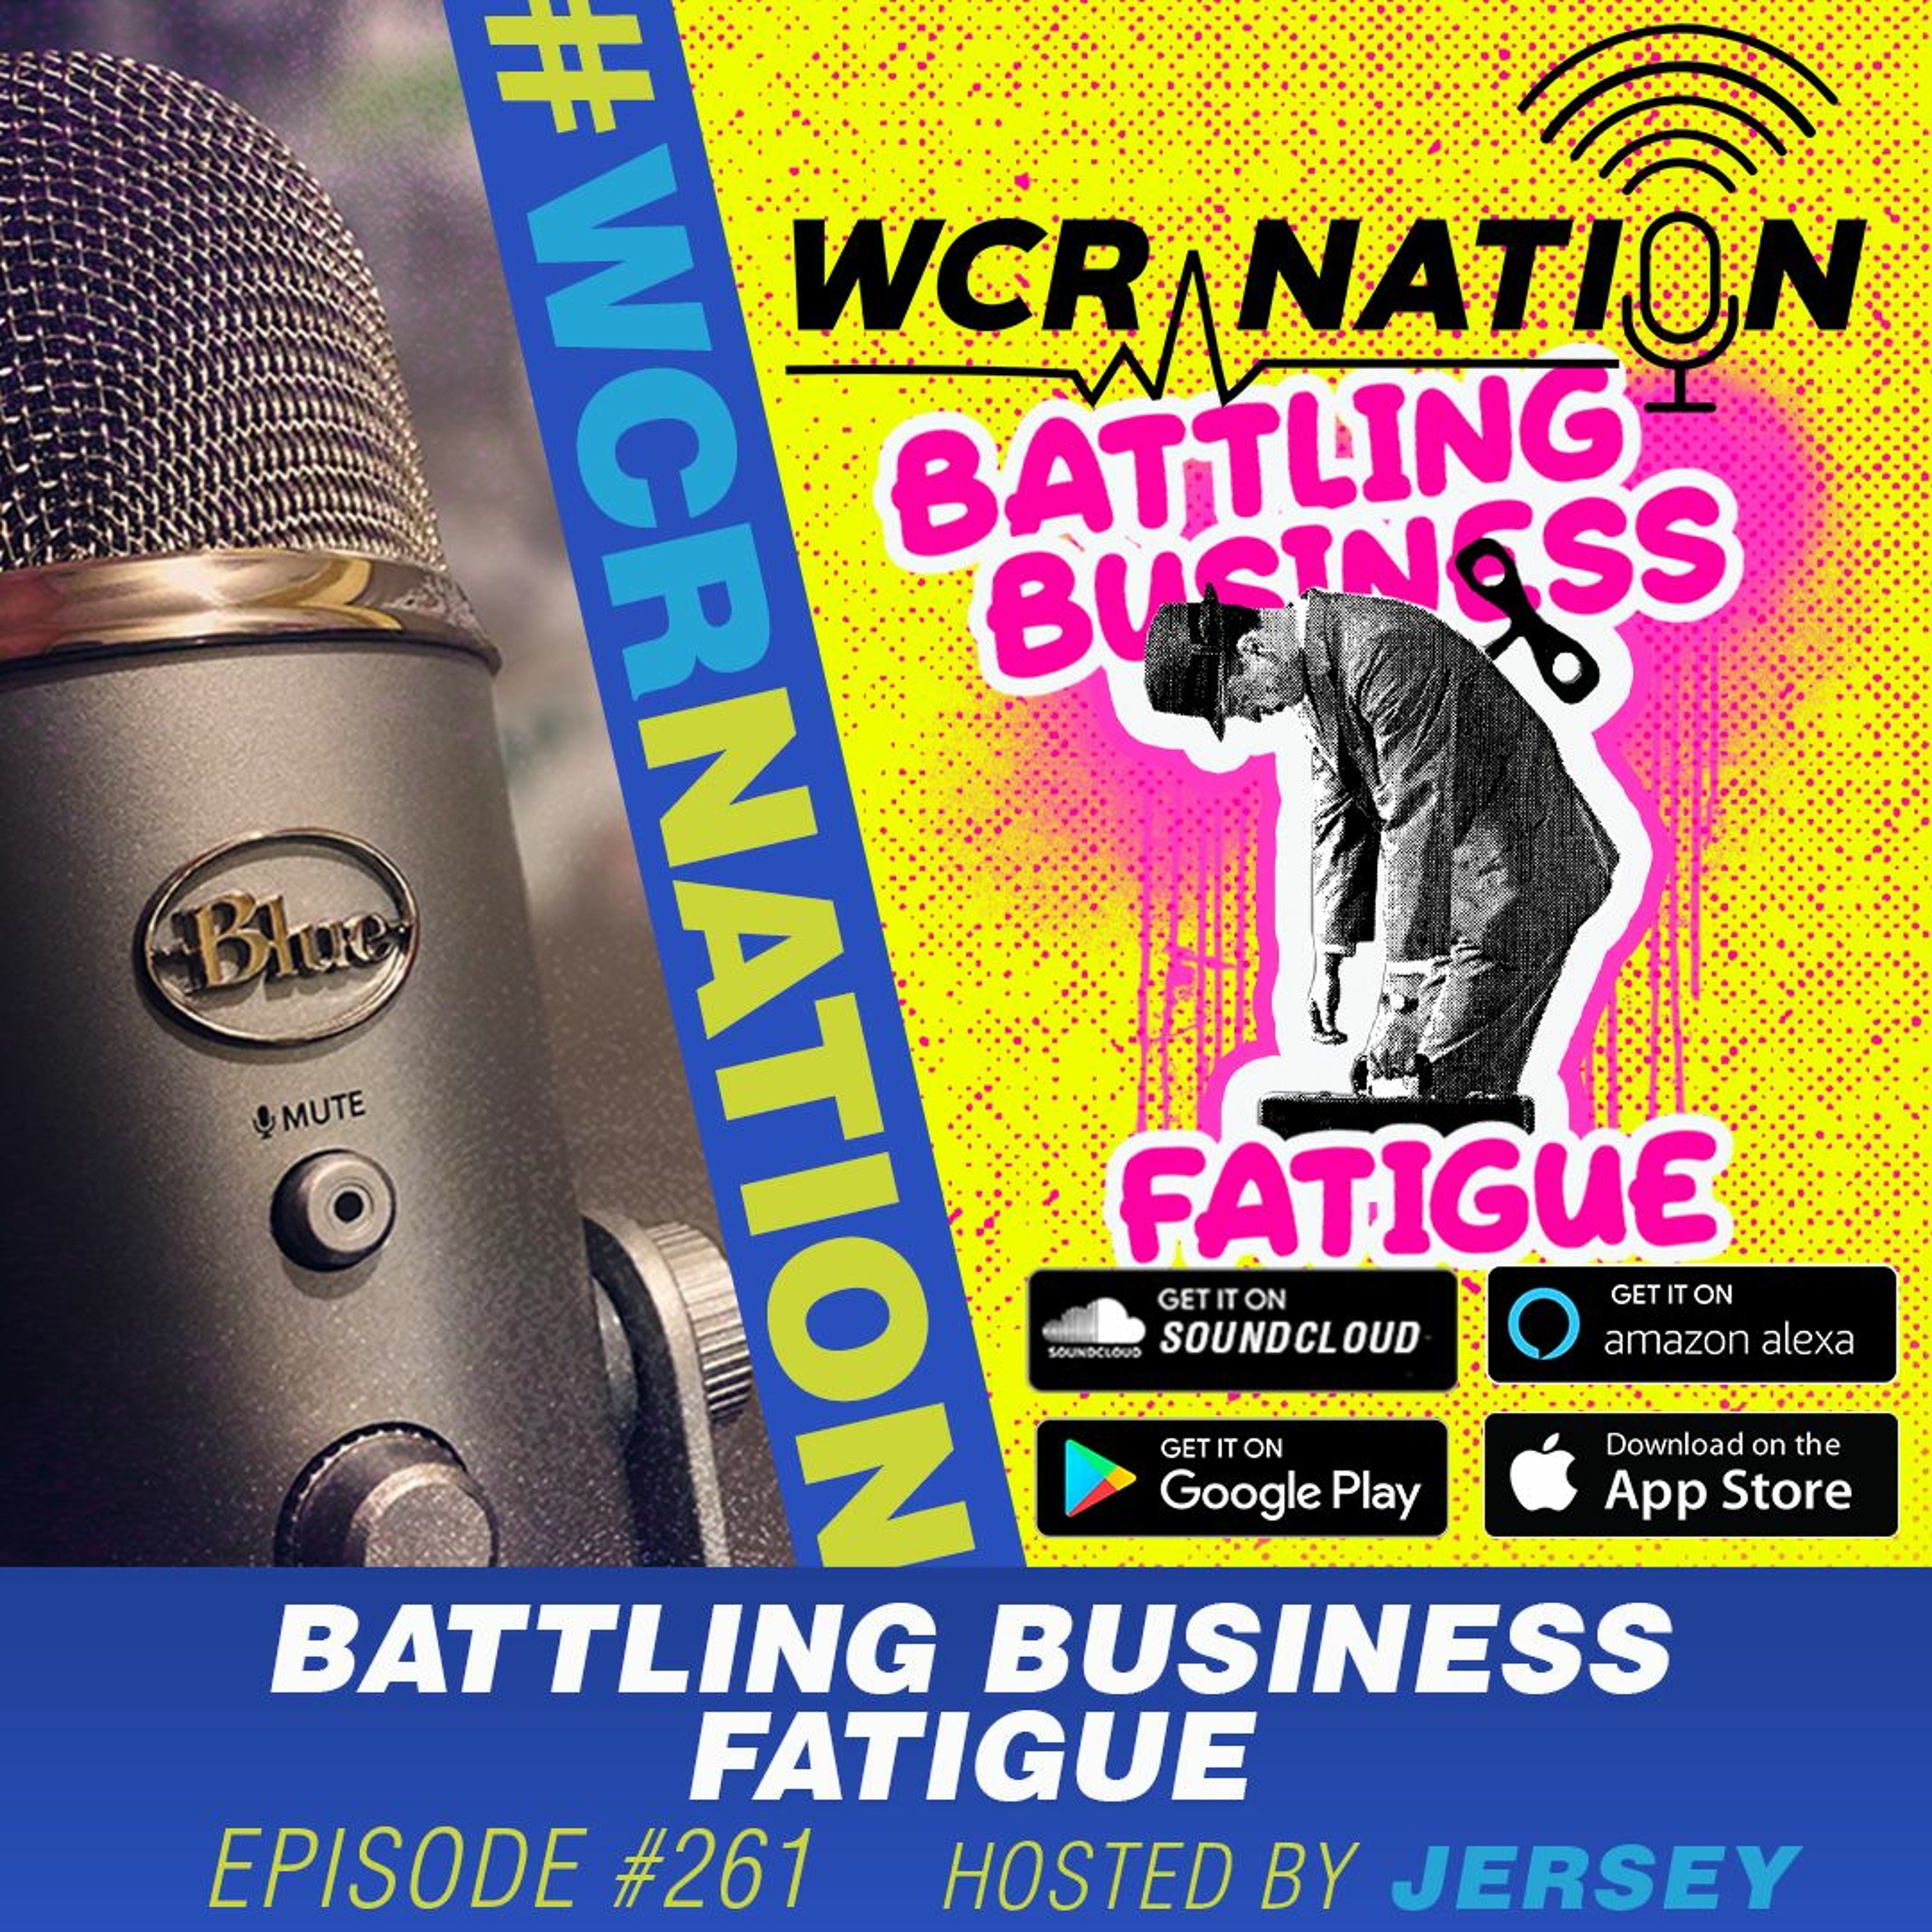 Battling business fatigue | WCR Nation Ep. 261 | A window cleaning podcast